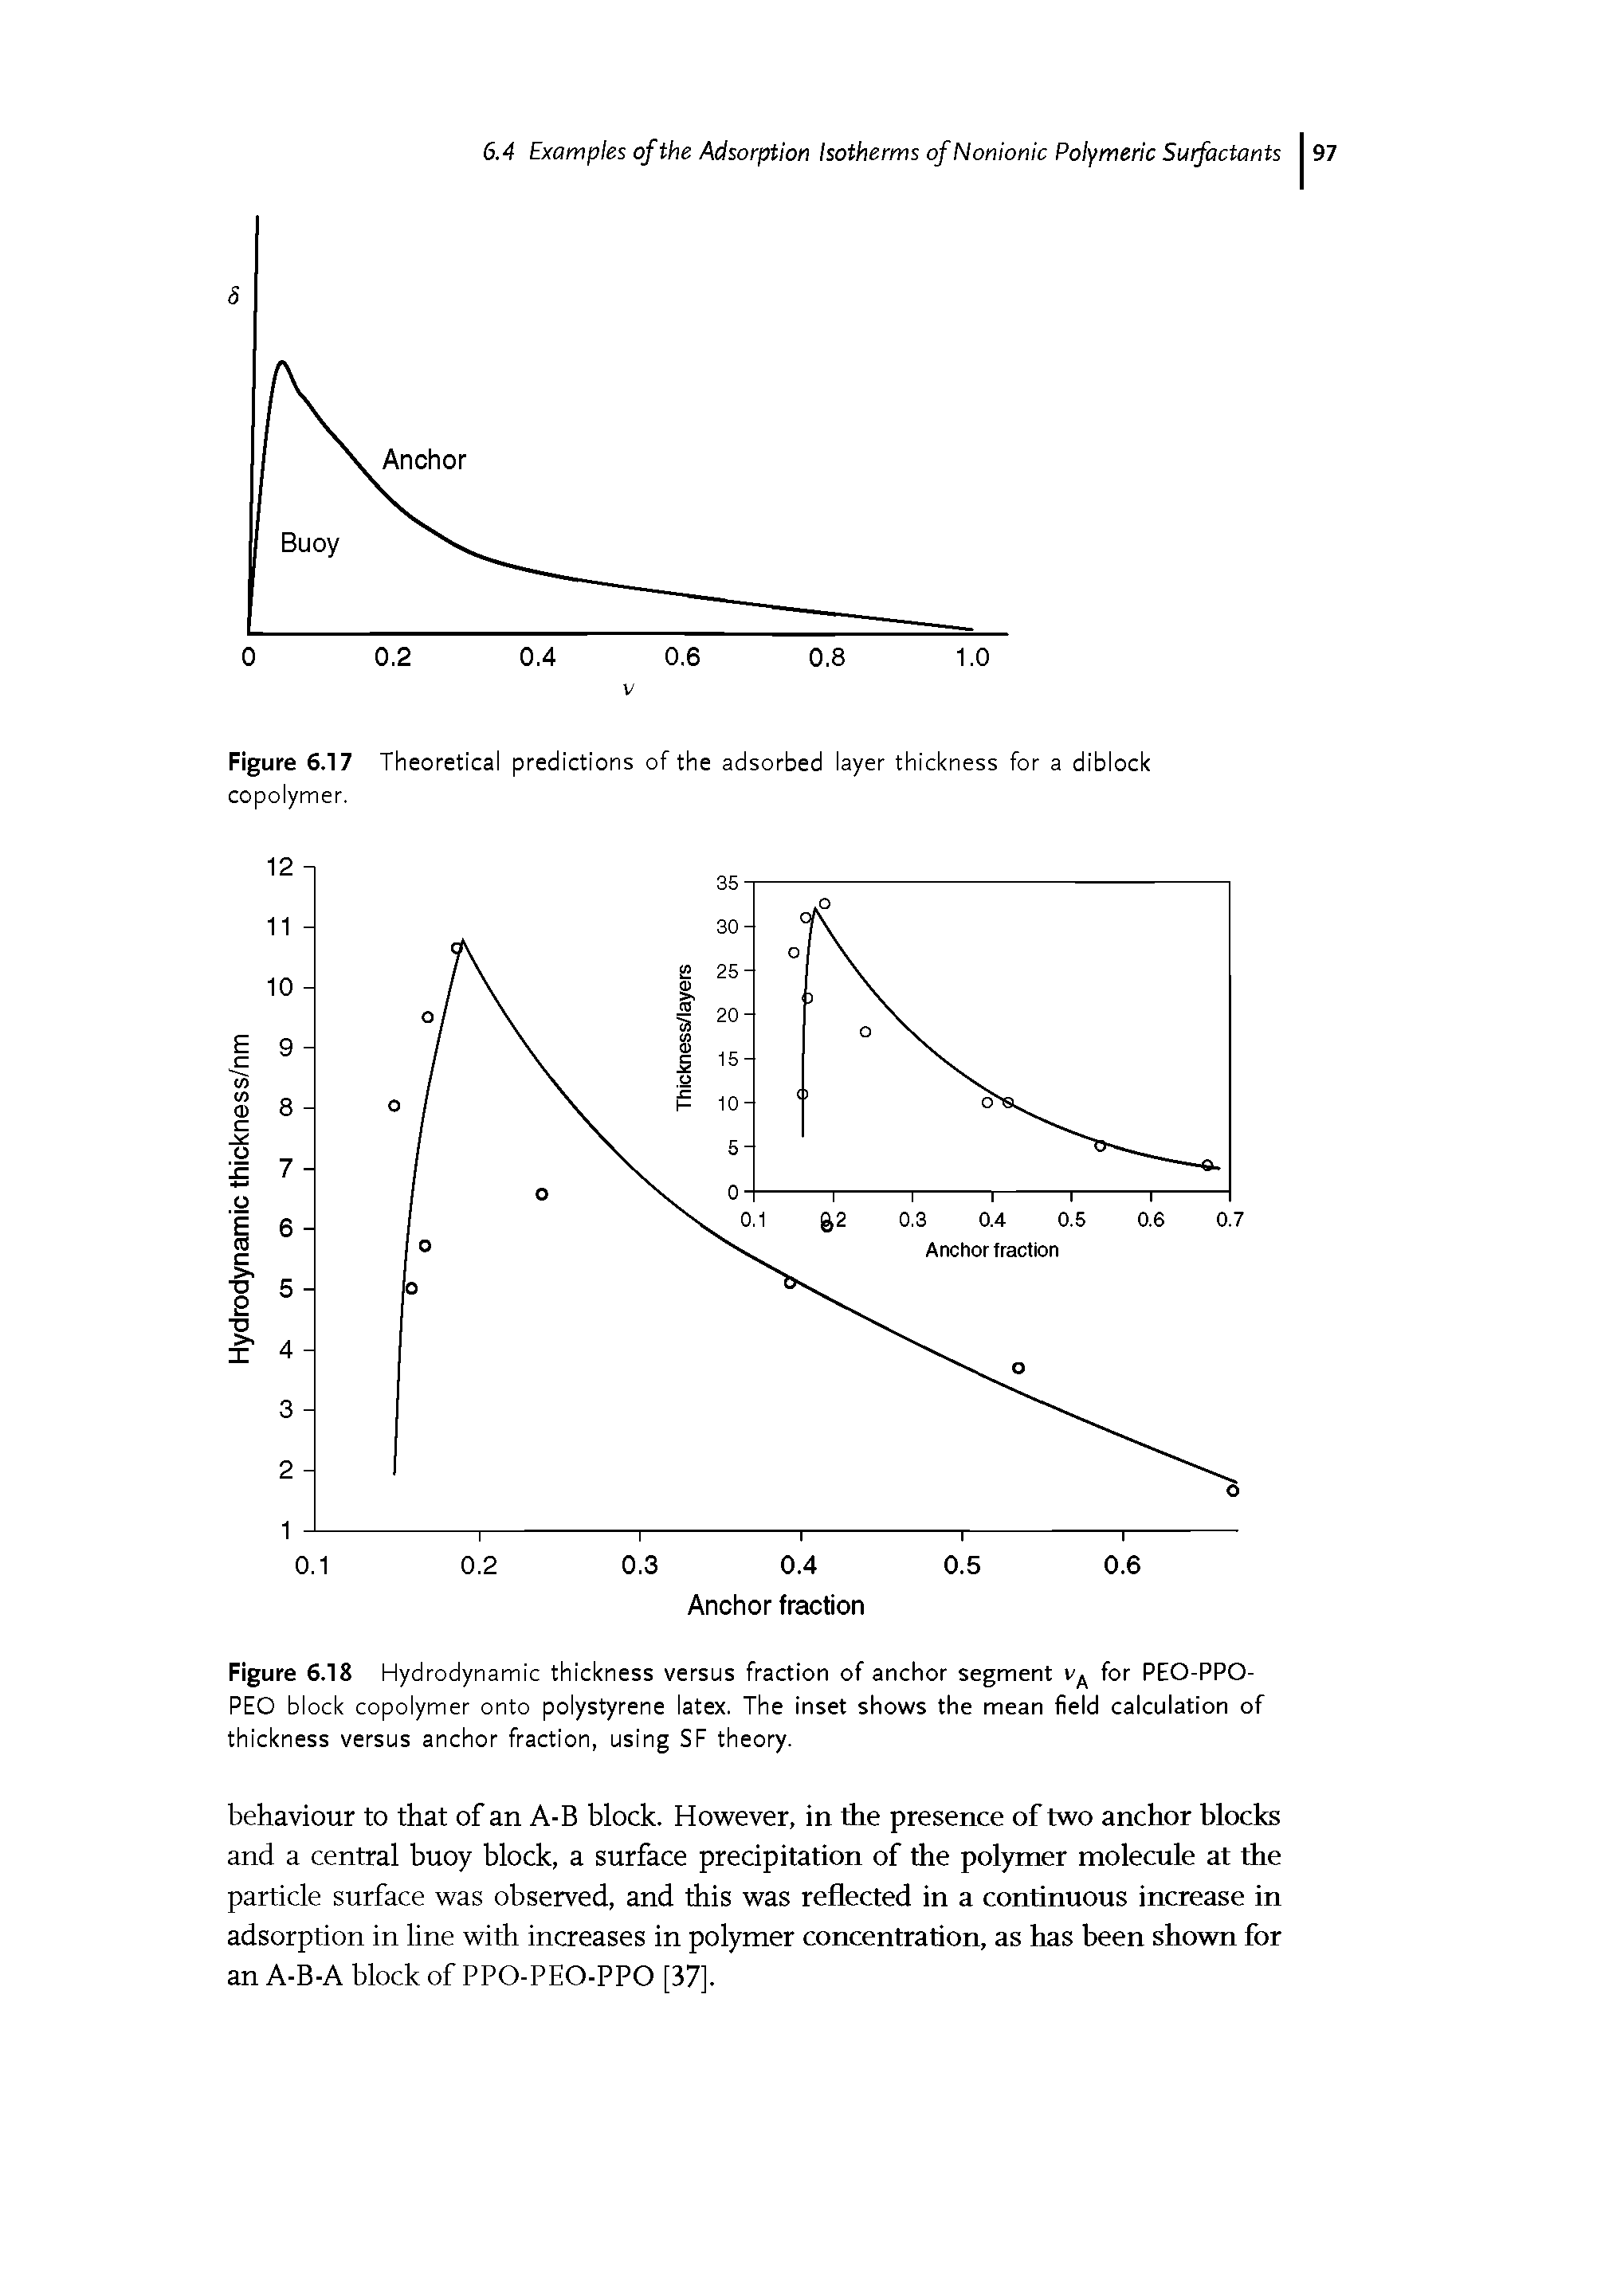 Figure 6.18 Hydrodynamic thickness versus fraction of anchor segment for PEO-PPO-PEO block copolymer onto polystyrene latex. The inset shows the mean field calculation of thickness versus anchor fraction, using SF theory.